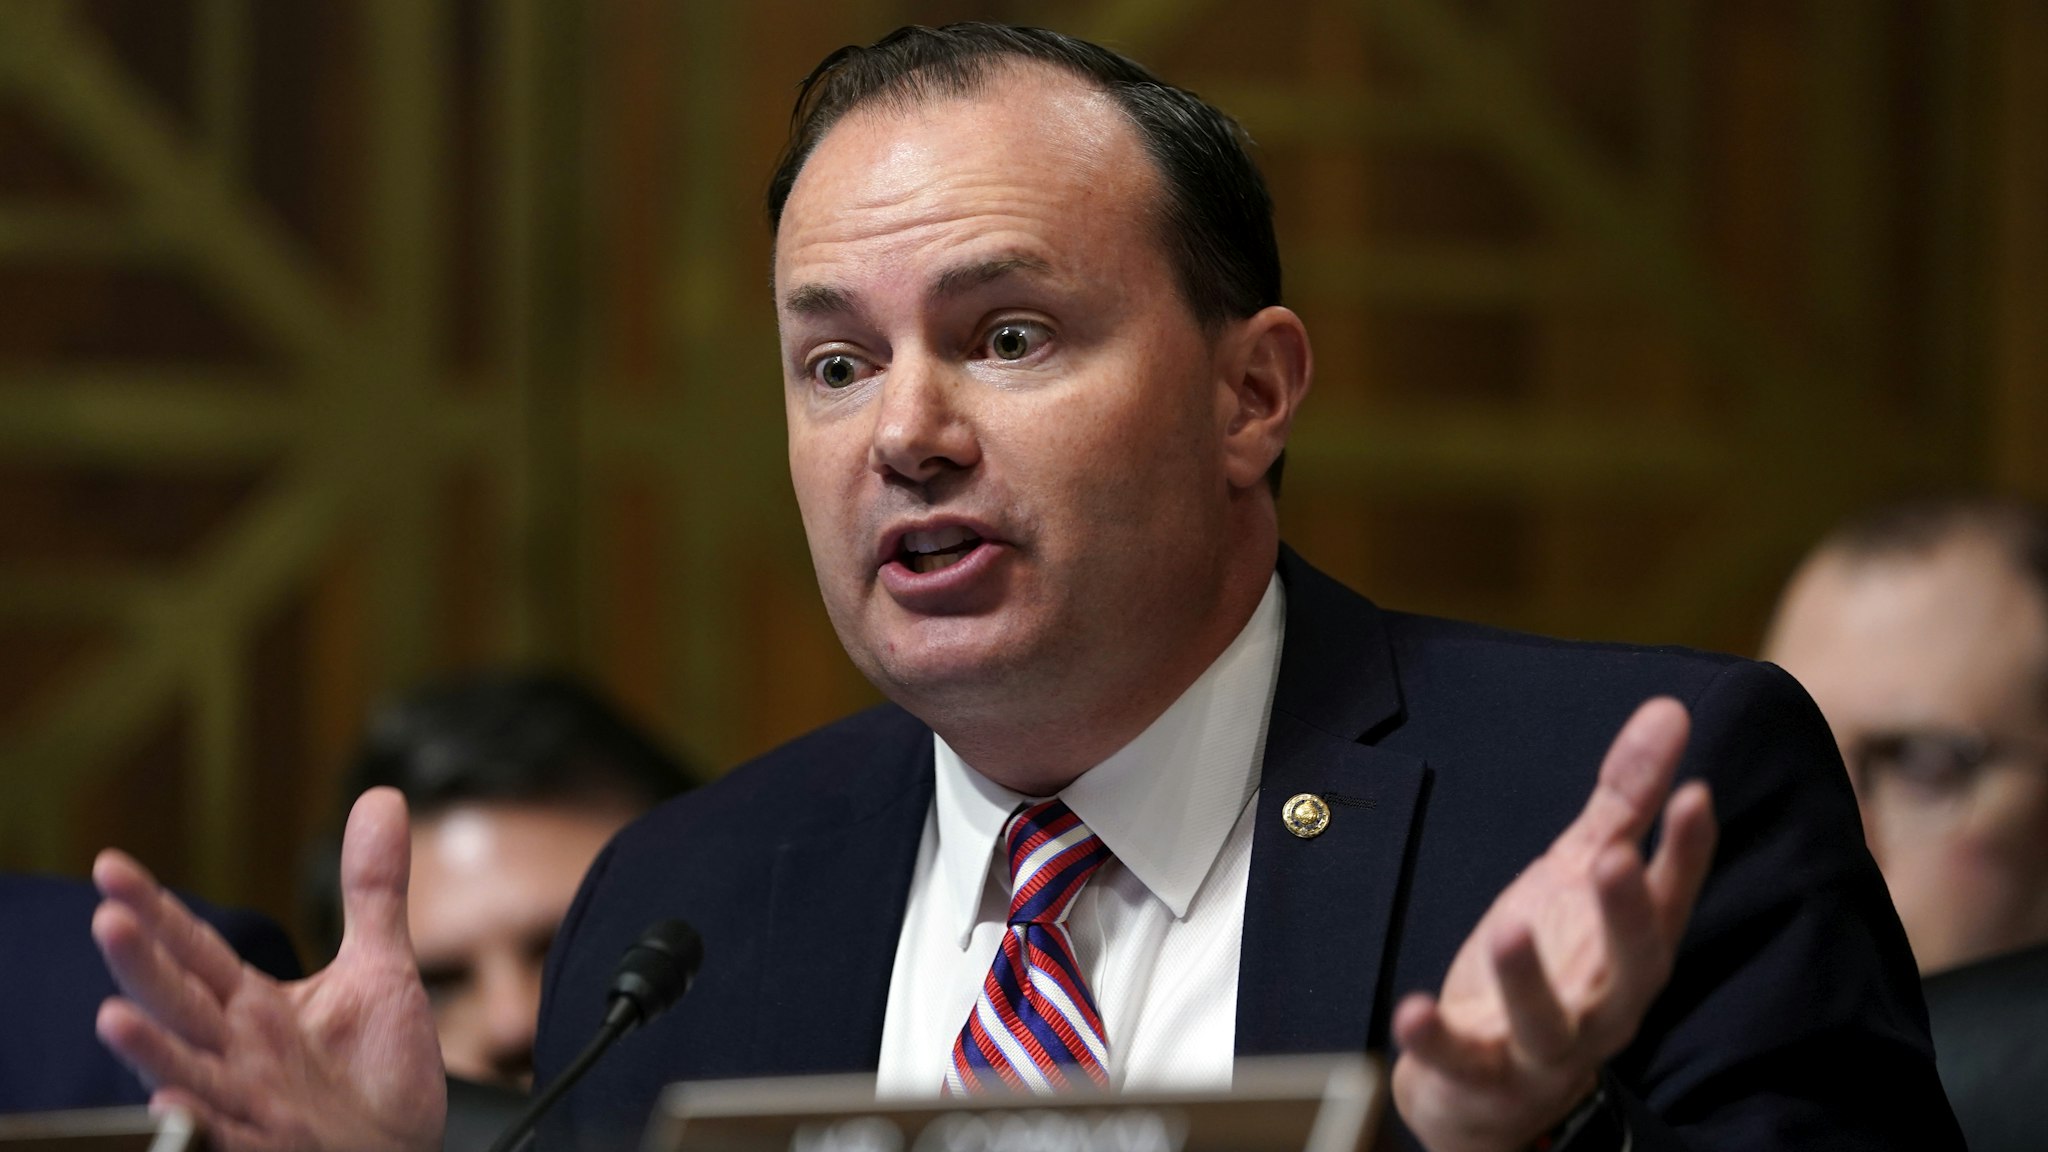 WASHINGTON, DC - SEPTEMBER 27: Sen. Mike Lee, R-Utah, questions Supreme Court nominee Brett Kavanaugh as he testifies before the Senate Judiciary Committee on Capitol Hill on September 27, 2018 in Washington, DC. Kavanaugh was called back to testify about claims by Dr. Christine Blasey Ford, who has accused him of sexually assaulting her during a party in 1982 when they were high school students in suburban Maryland.